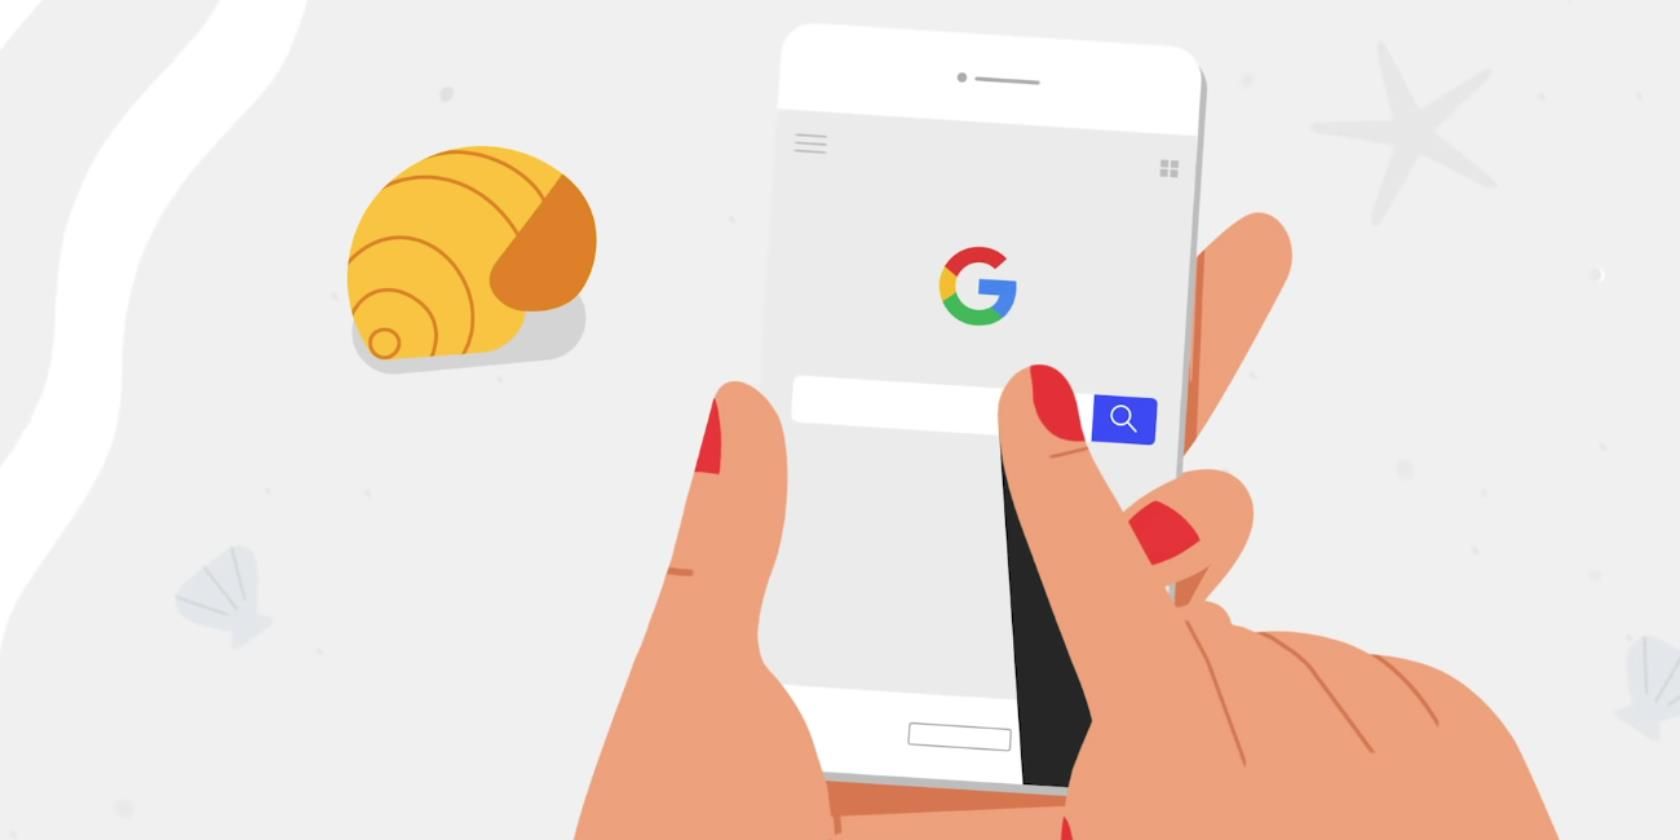 Cartoon hand tapping the Google homepage on a smartphone